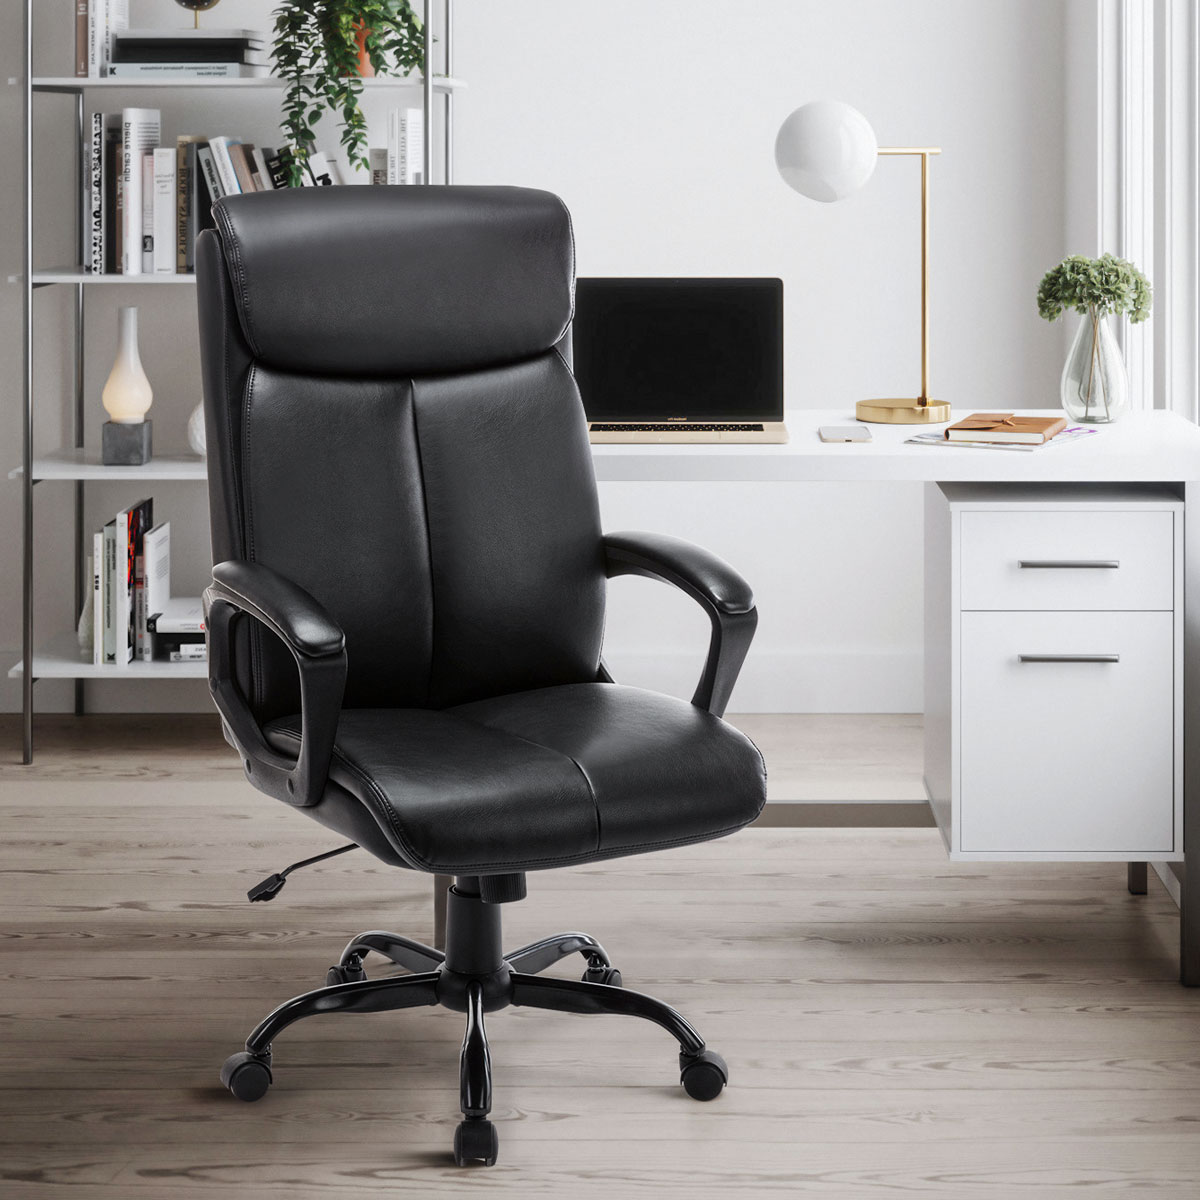 Details about   Home Office Desk Chairs High Back Ergonomic Executive Chair Swivel Task Chair 